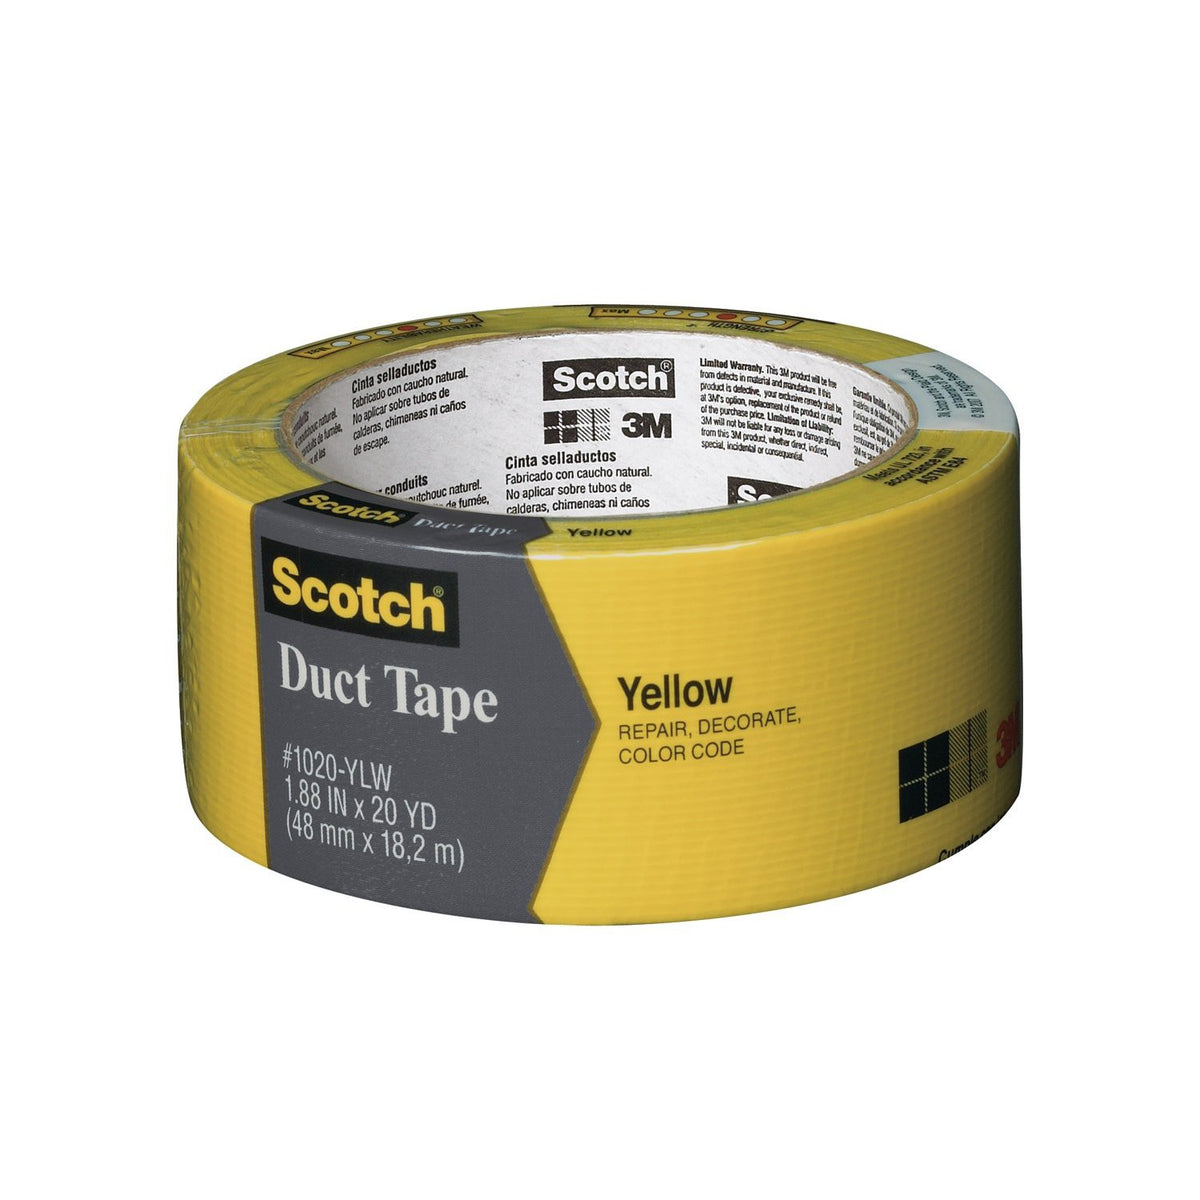 Shop for your Yellow sticky tape